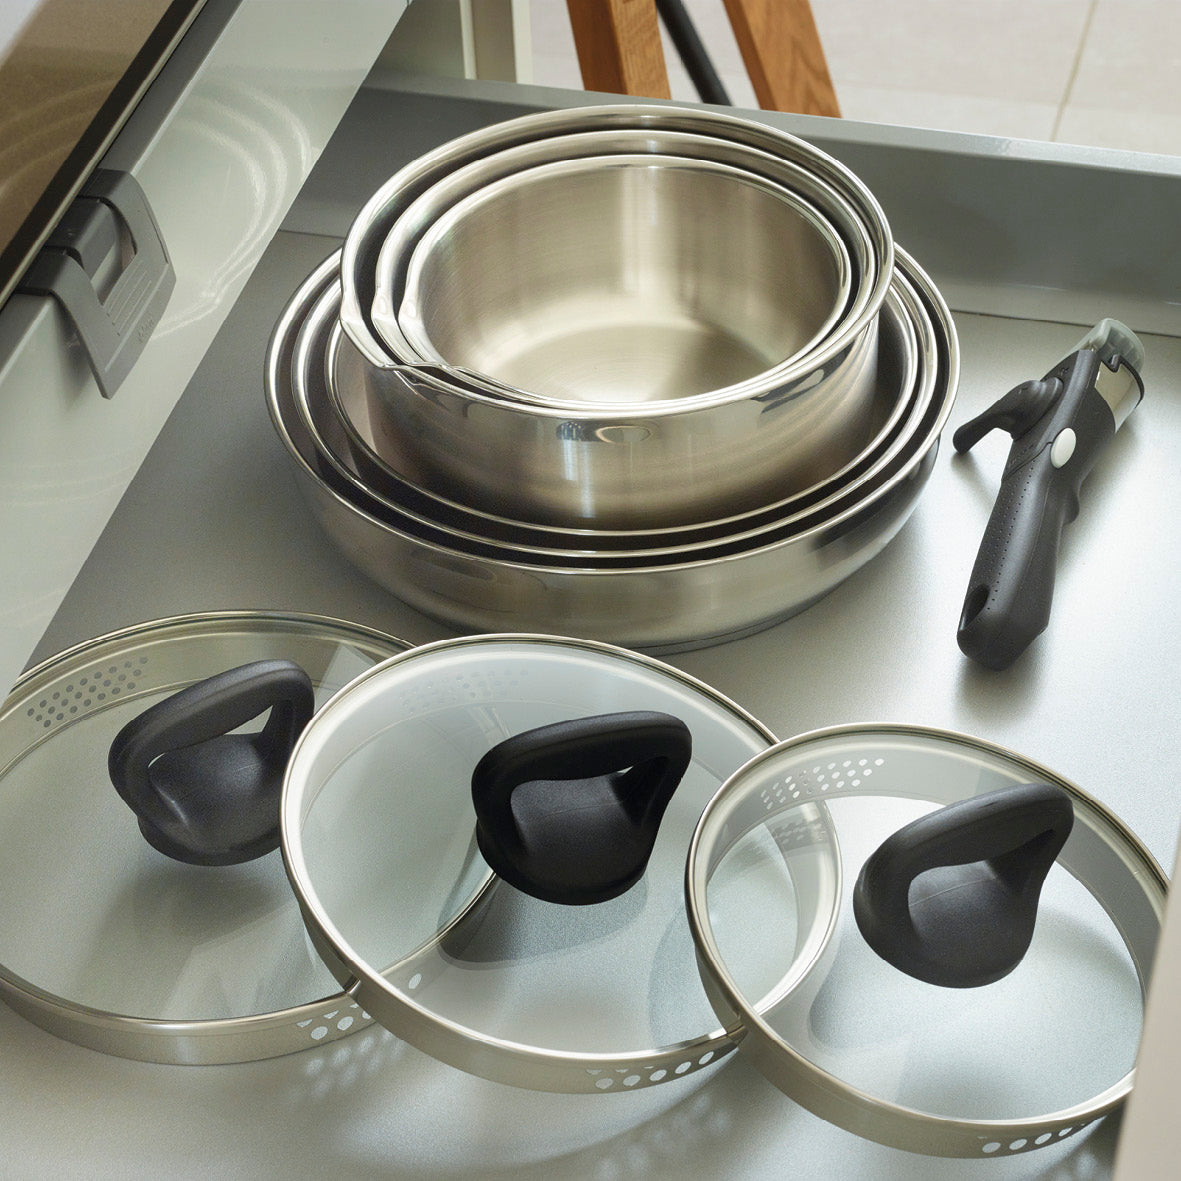 Removable handle for stainless steel cookware